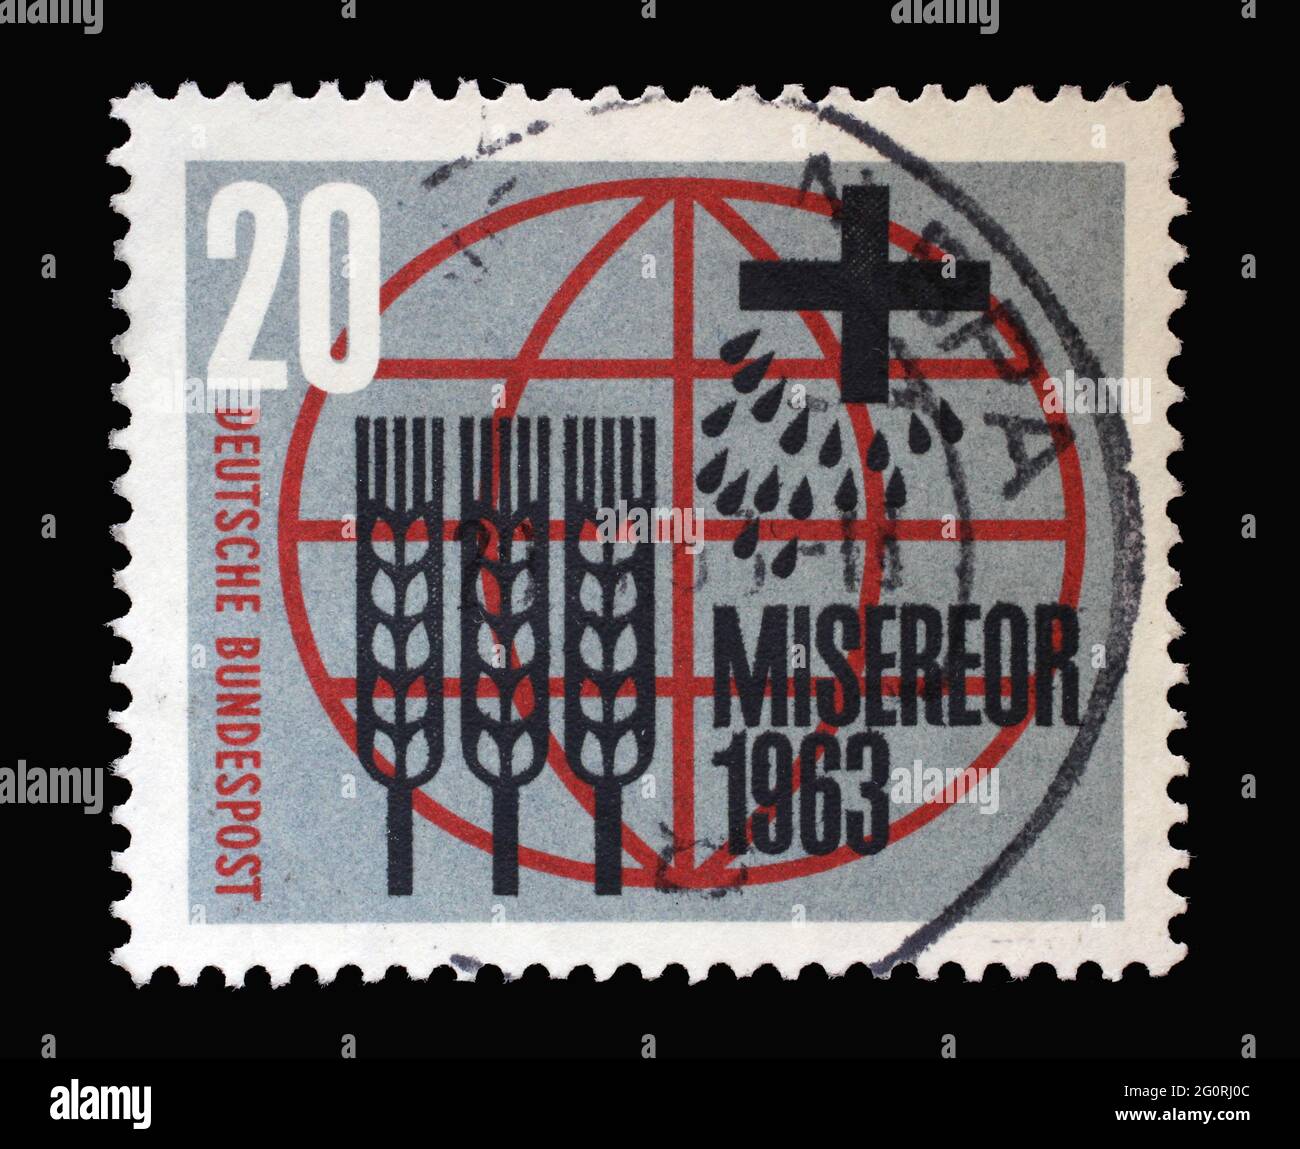 Stamp printed in Germany showing Stylized ears of corn, grains, cross and inscription in front of the globe honoring Miserior freedom from hunger, cir Stock Photo